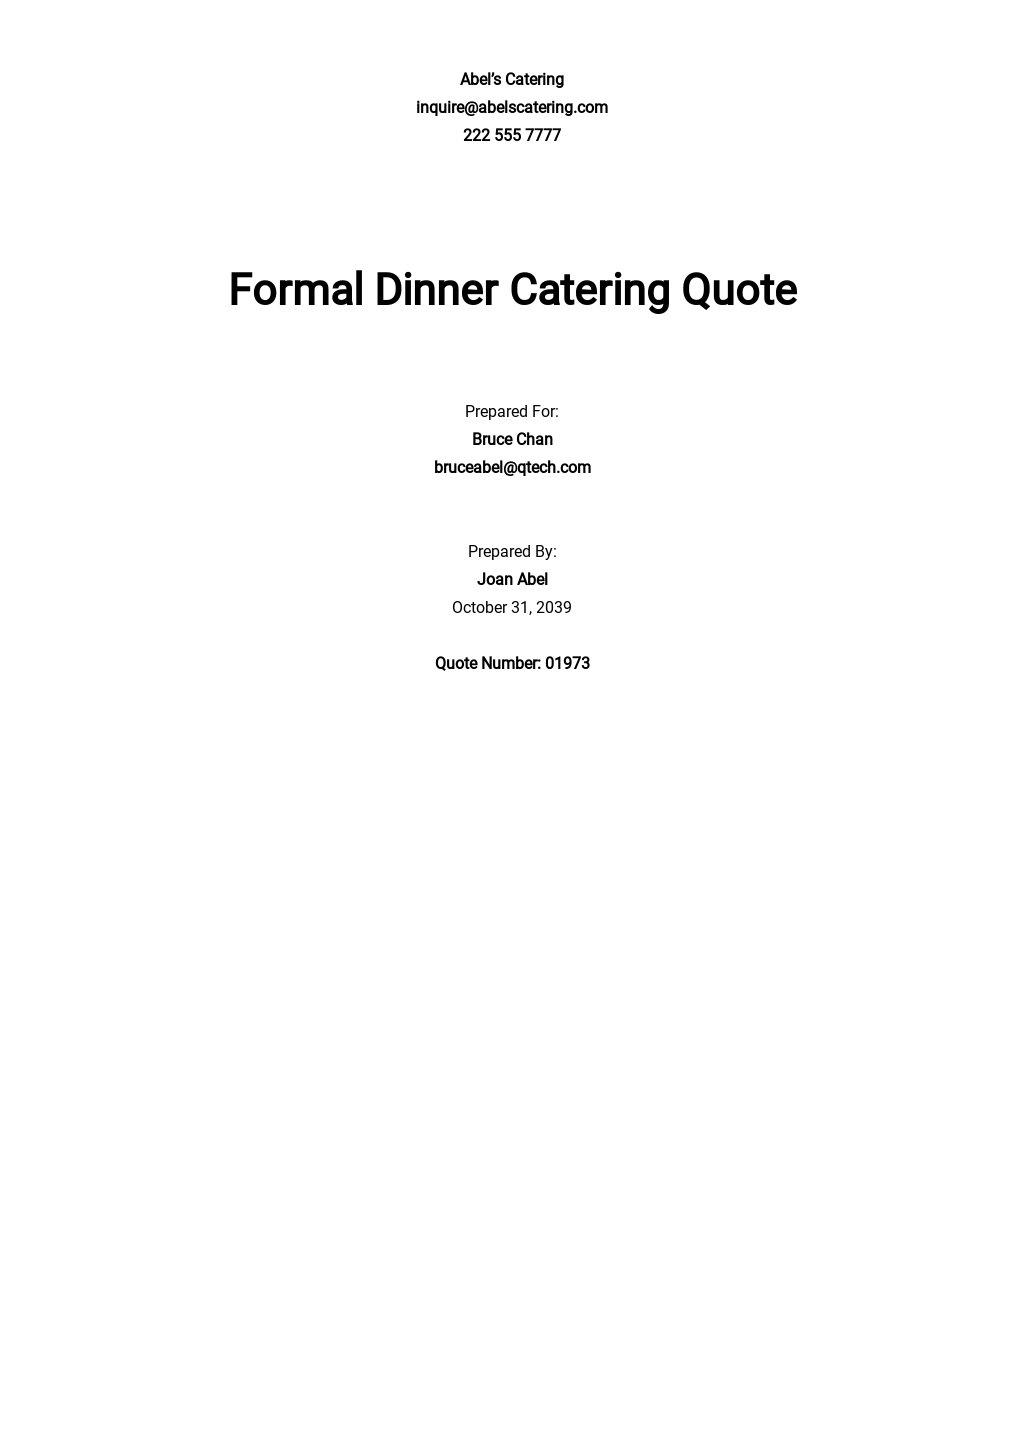 Sample Catering Quotation Template.jpe